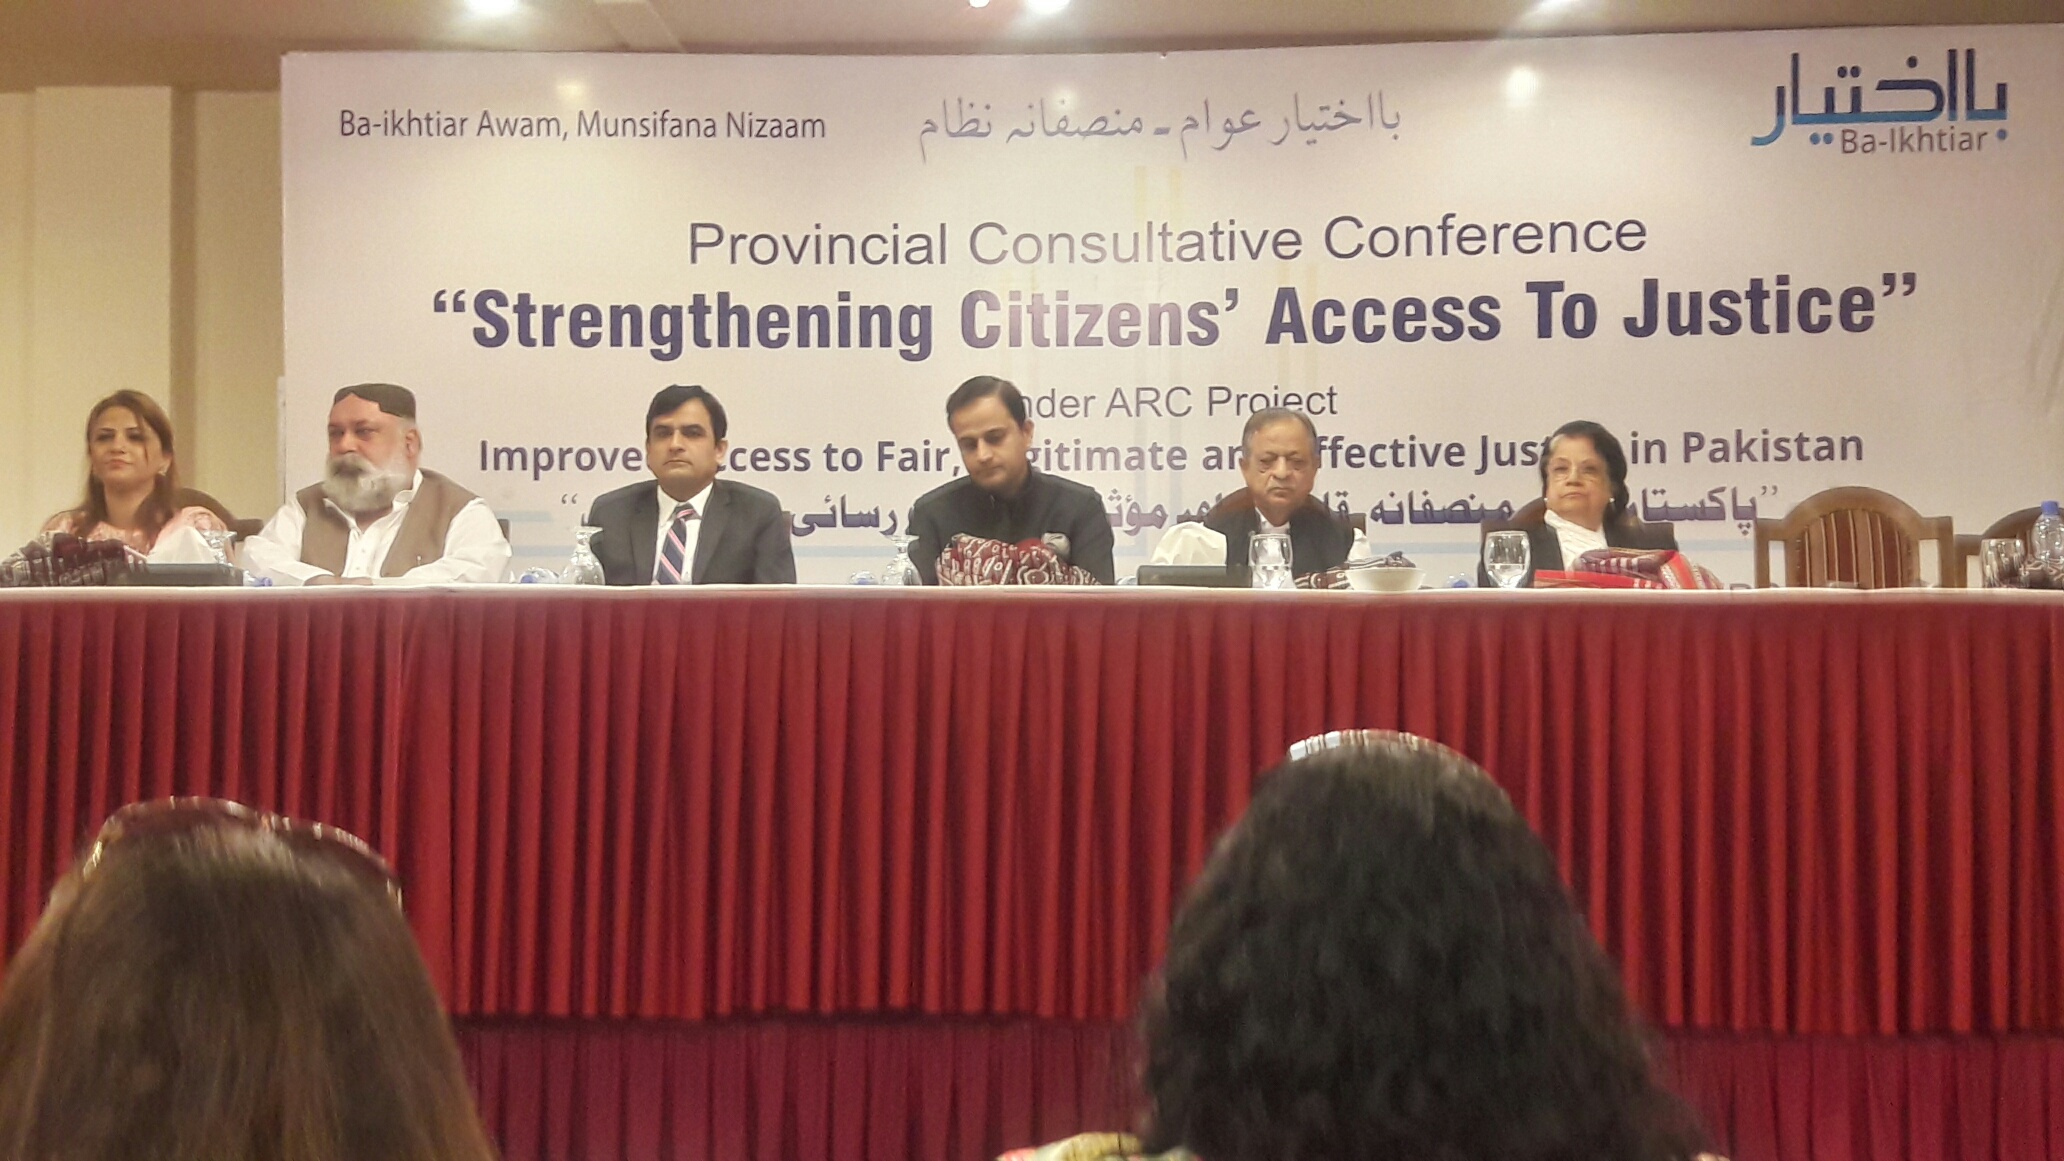 Provincial Conference on “Strengthening Citizen’s Access to Justice”